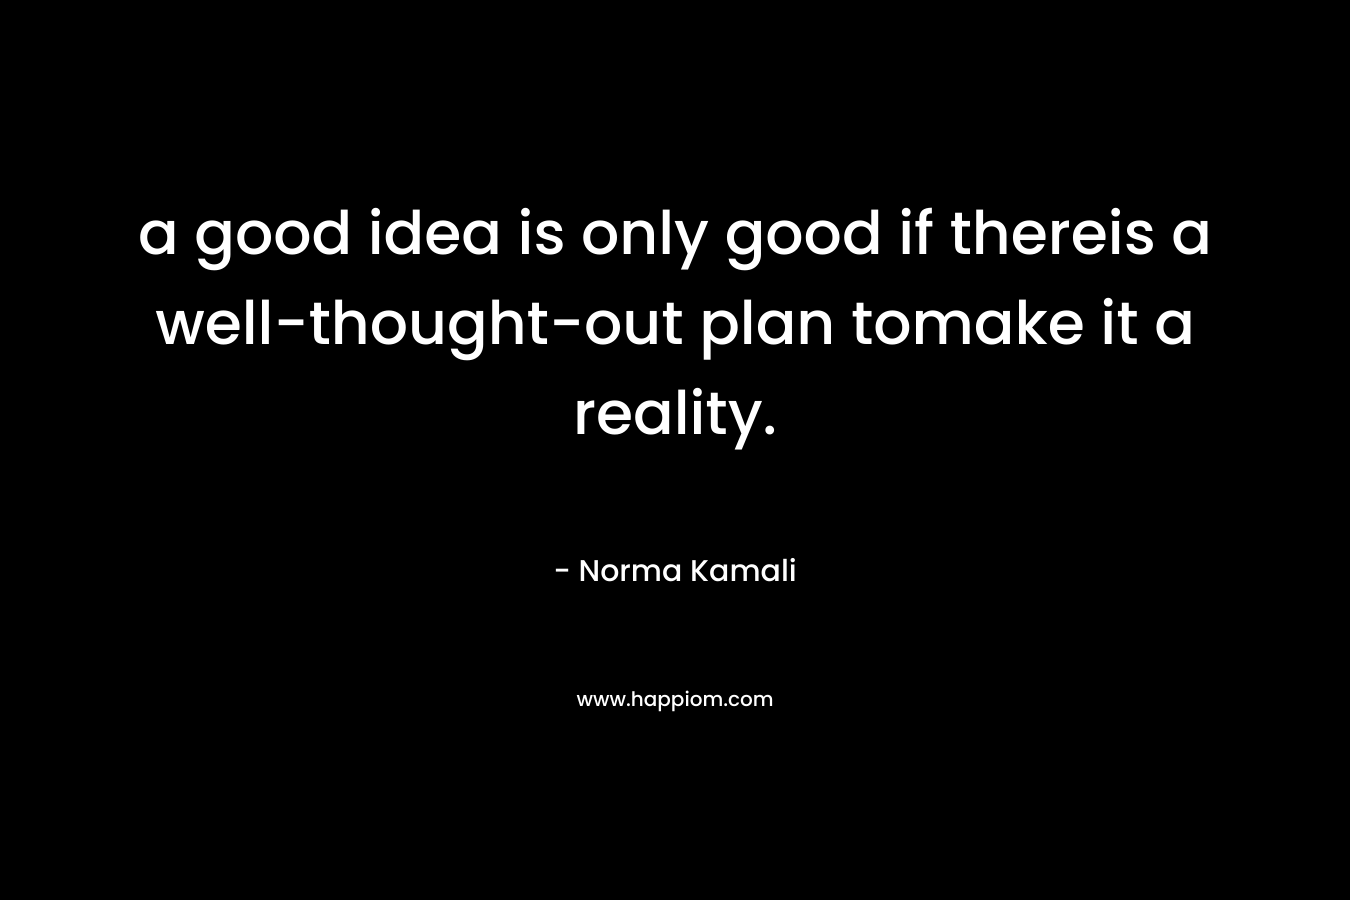 a good idea is only good if thereis a well-thought-out plan tomake it a reality. – Norma Kamali